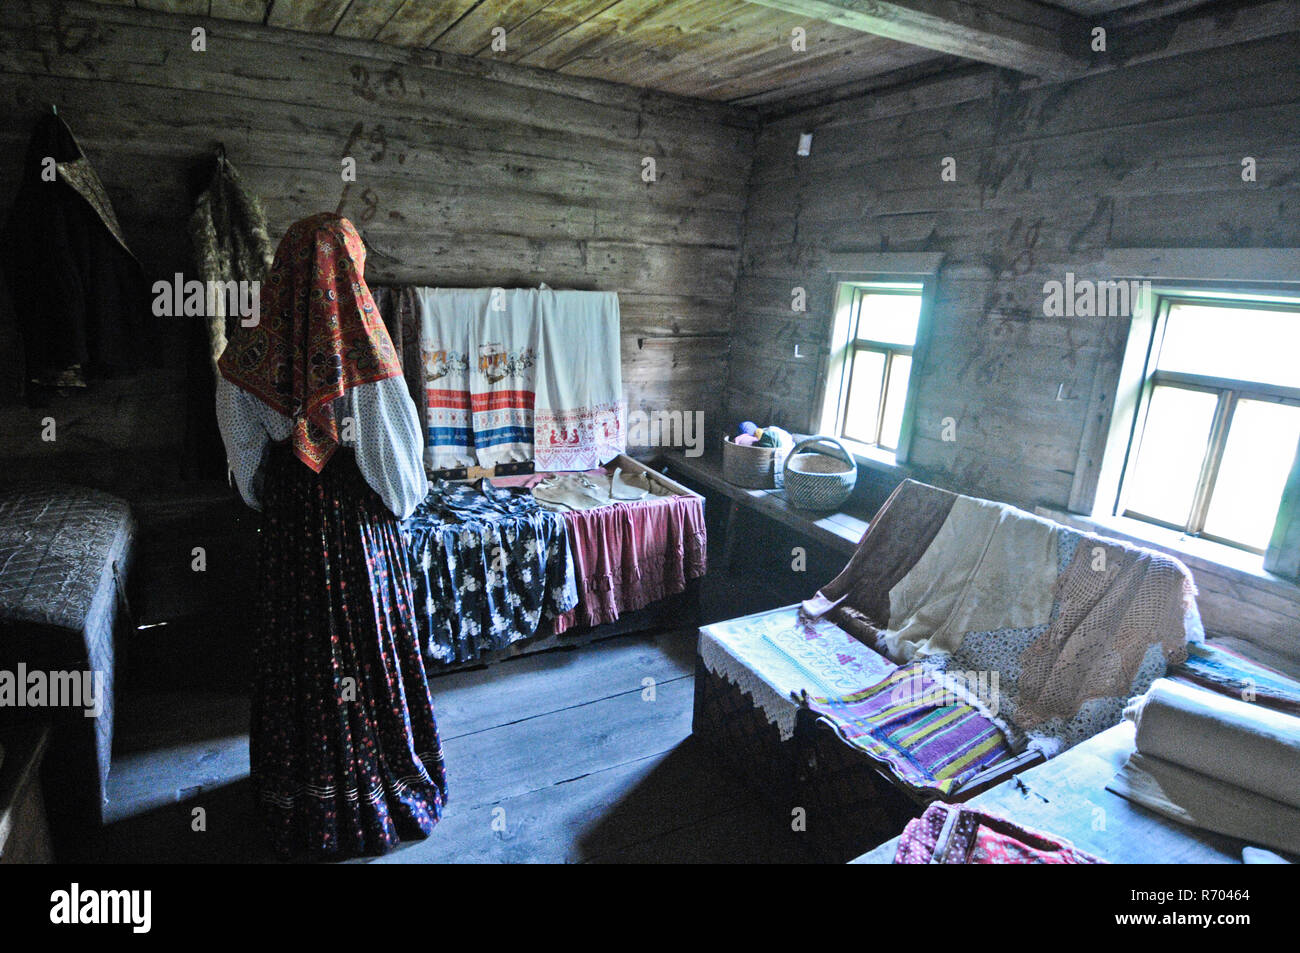 Museum of Wooden Architecture and Peasant Life - Interior of an ancient Russian wooden house, with traditional costumes. Suzdal Stock Photo